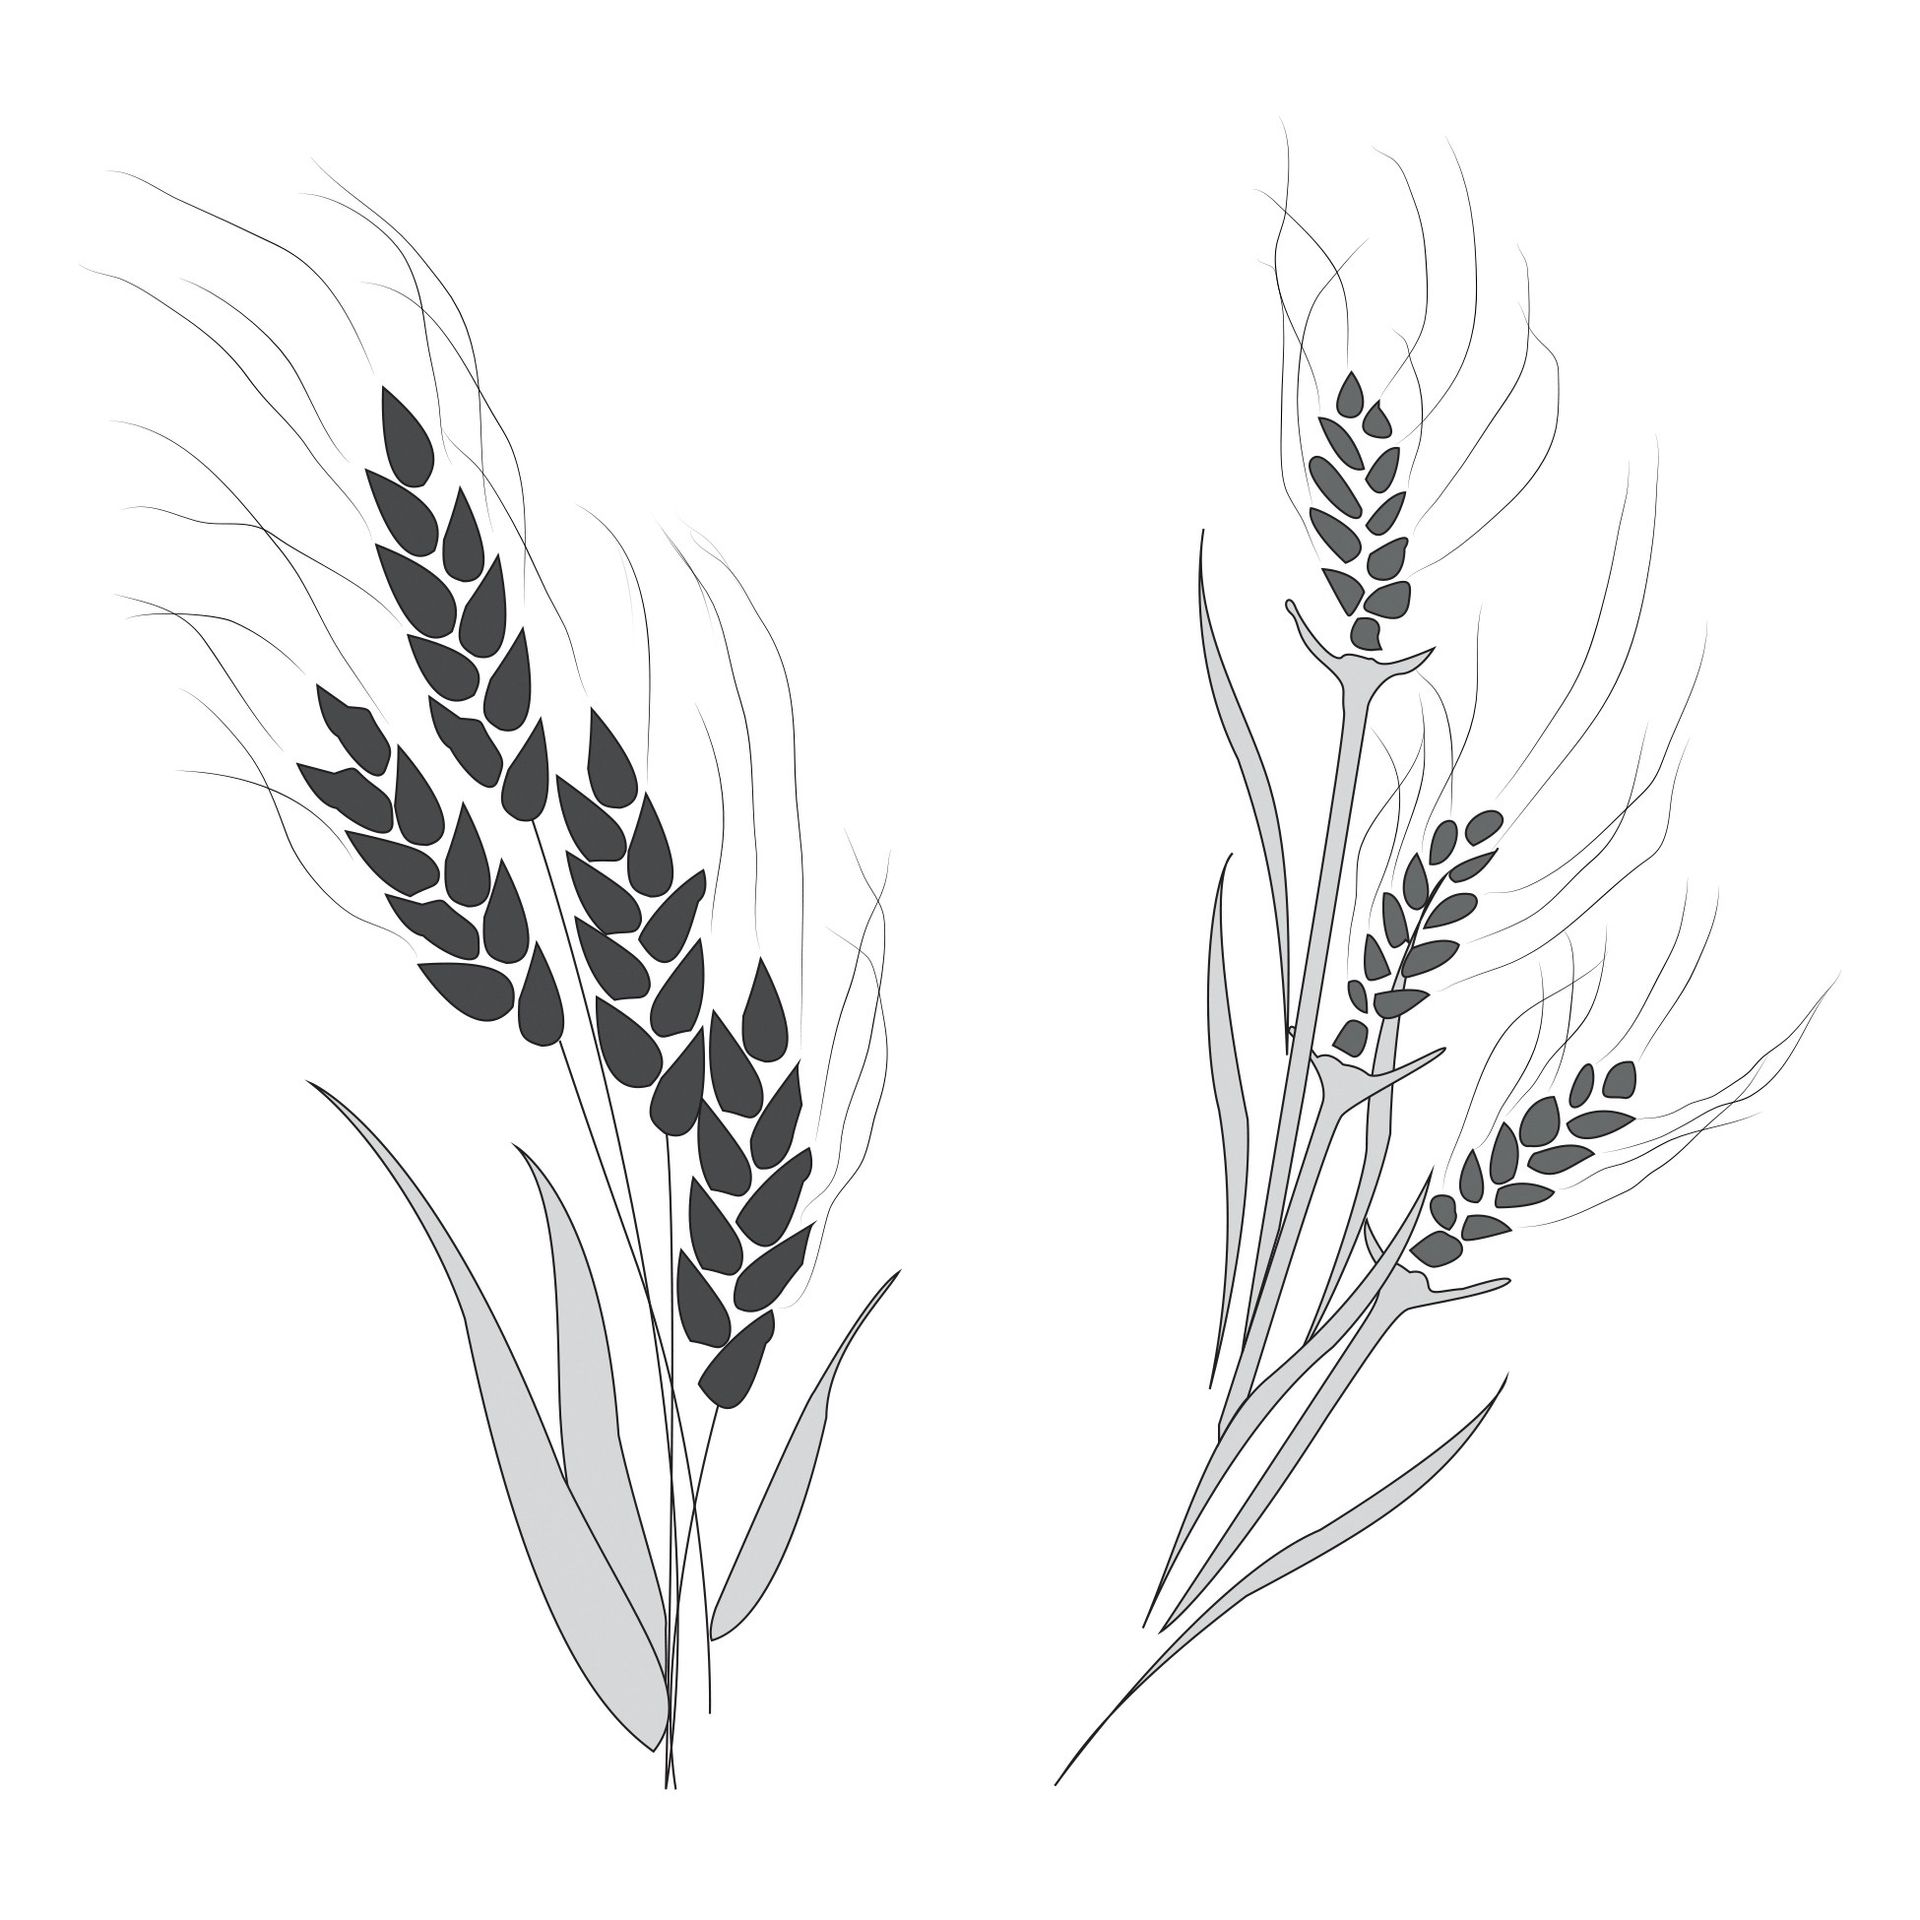 A black-and-white illustration of wheat and a tare.